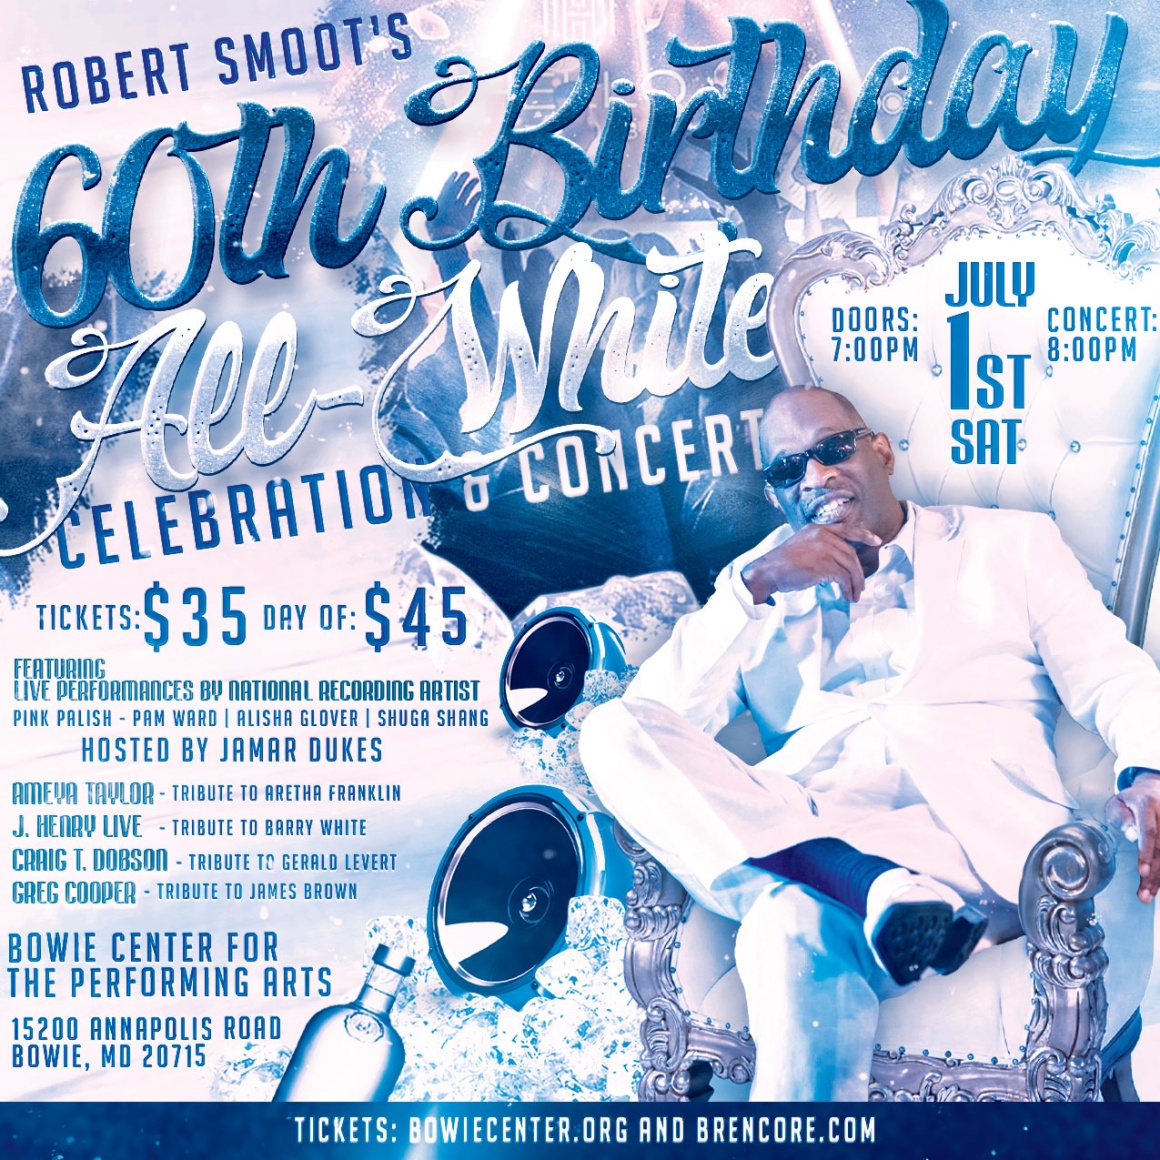 BRENCORE Entertainment’s Robert Smoot 60th Birthday Celebration at the Bowie Center For the Performing Arts